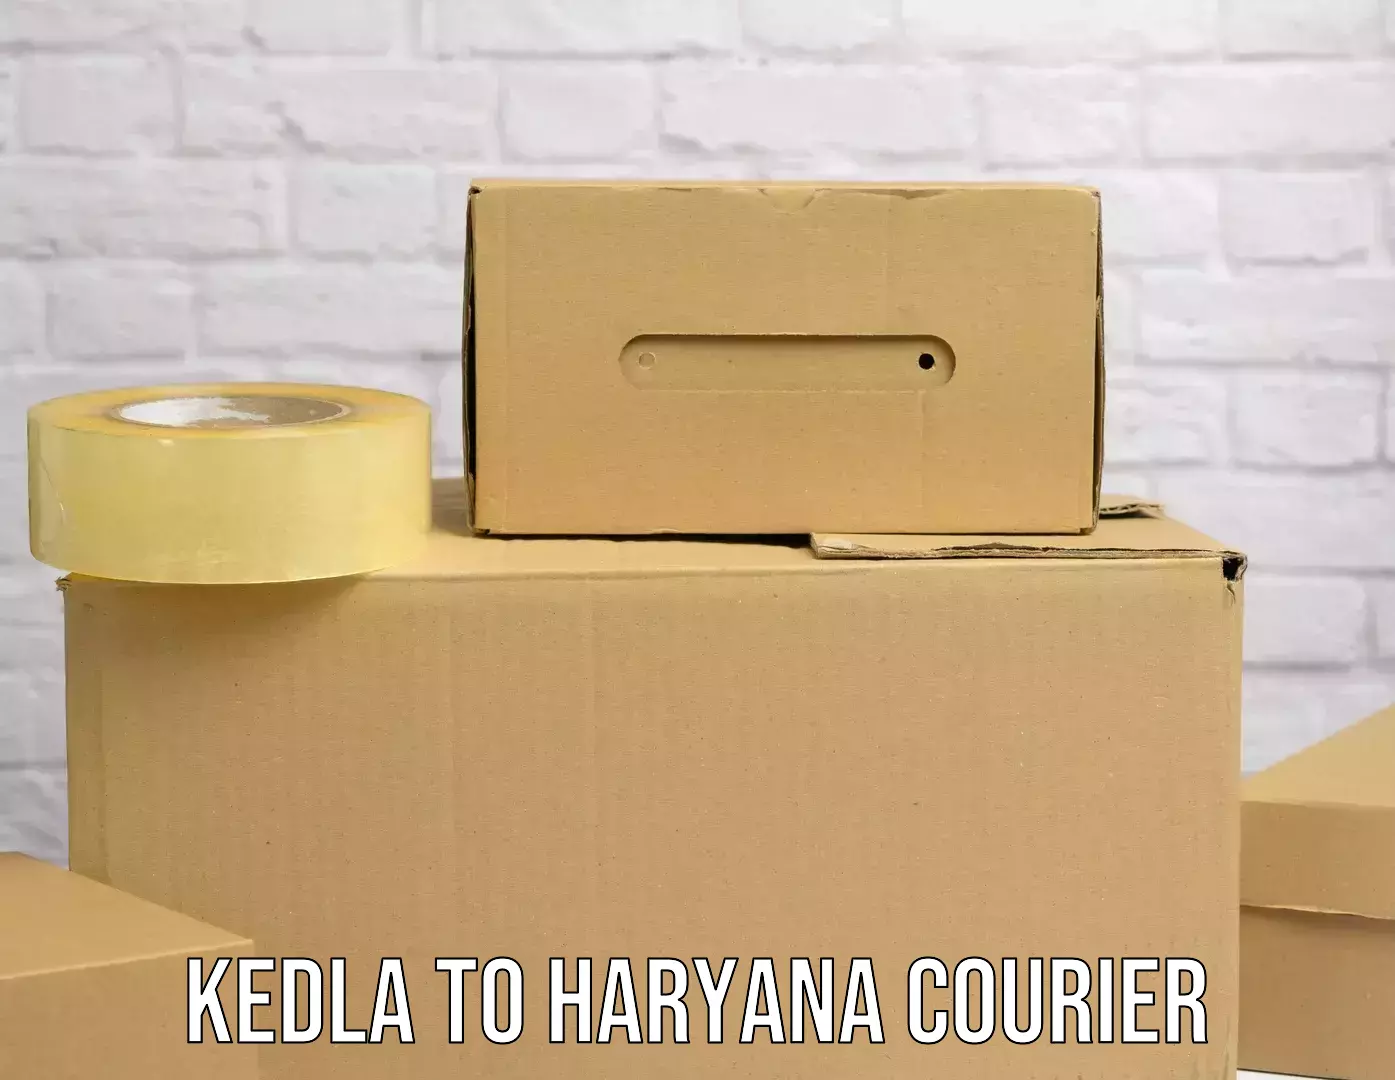 High-capacity courier solutions Kedla to NCR Haryana